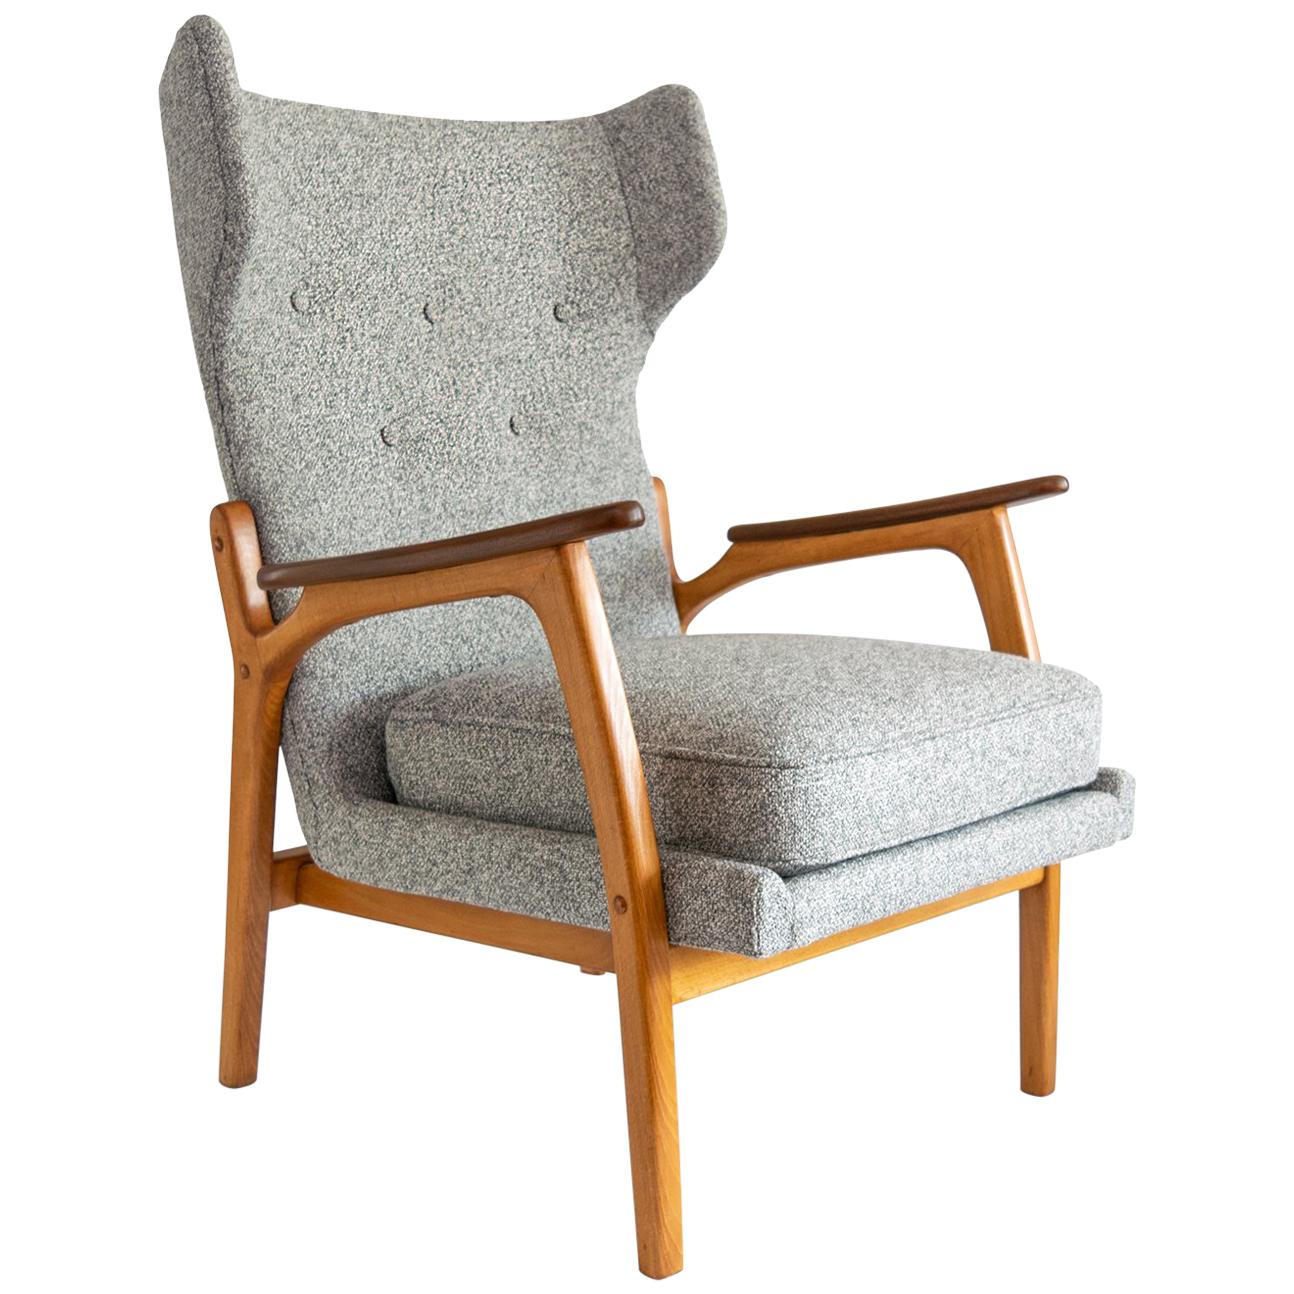 Scandinavian Modern Wingback Chair with a Solid Beech Wood Frame and Teak Arms